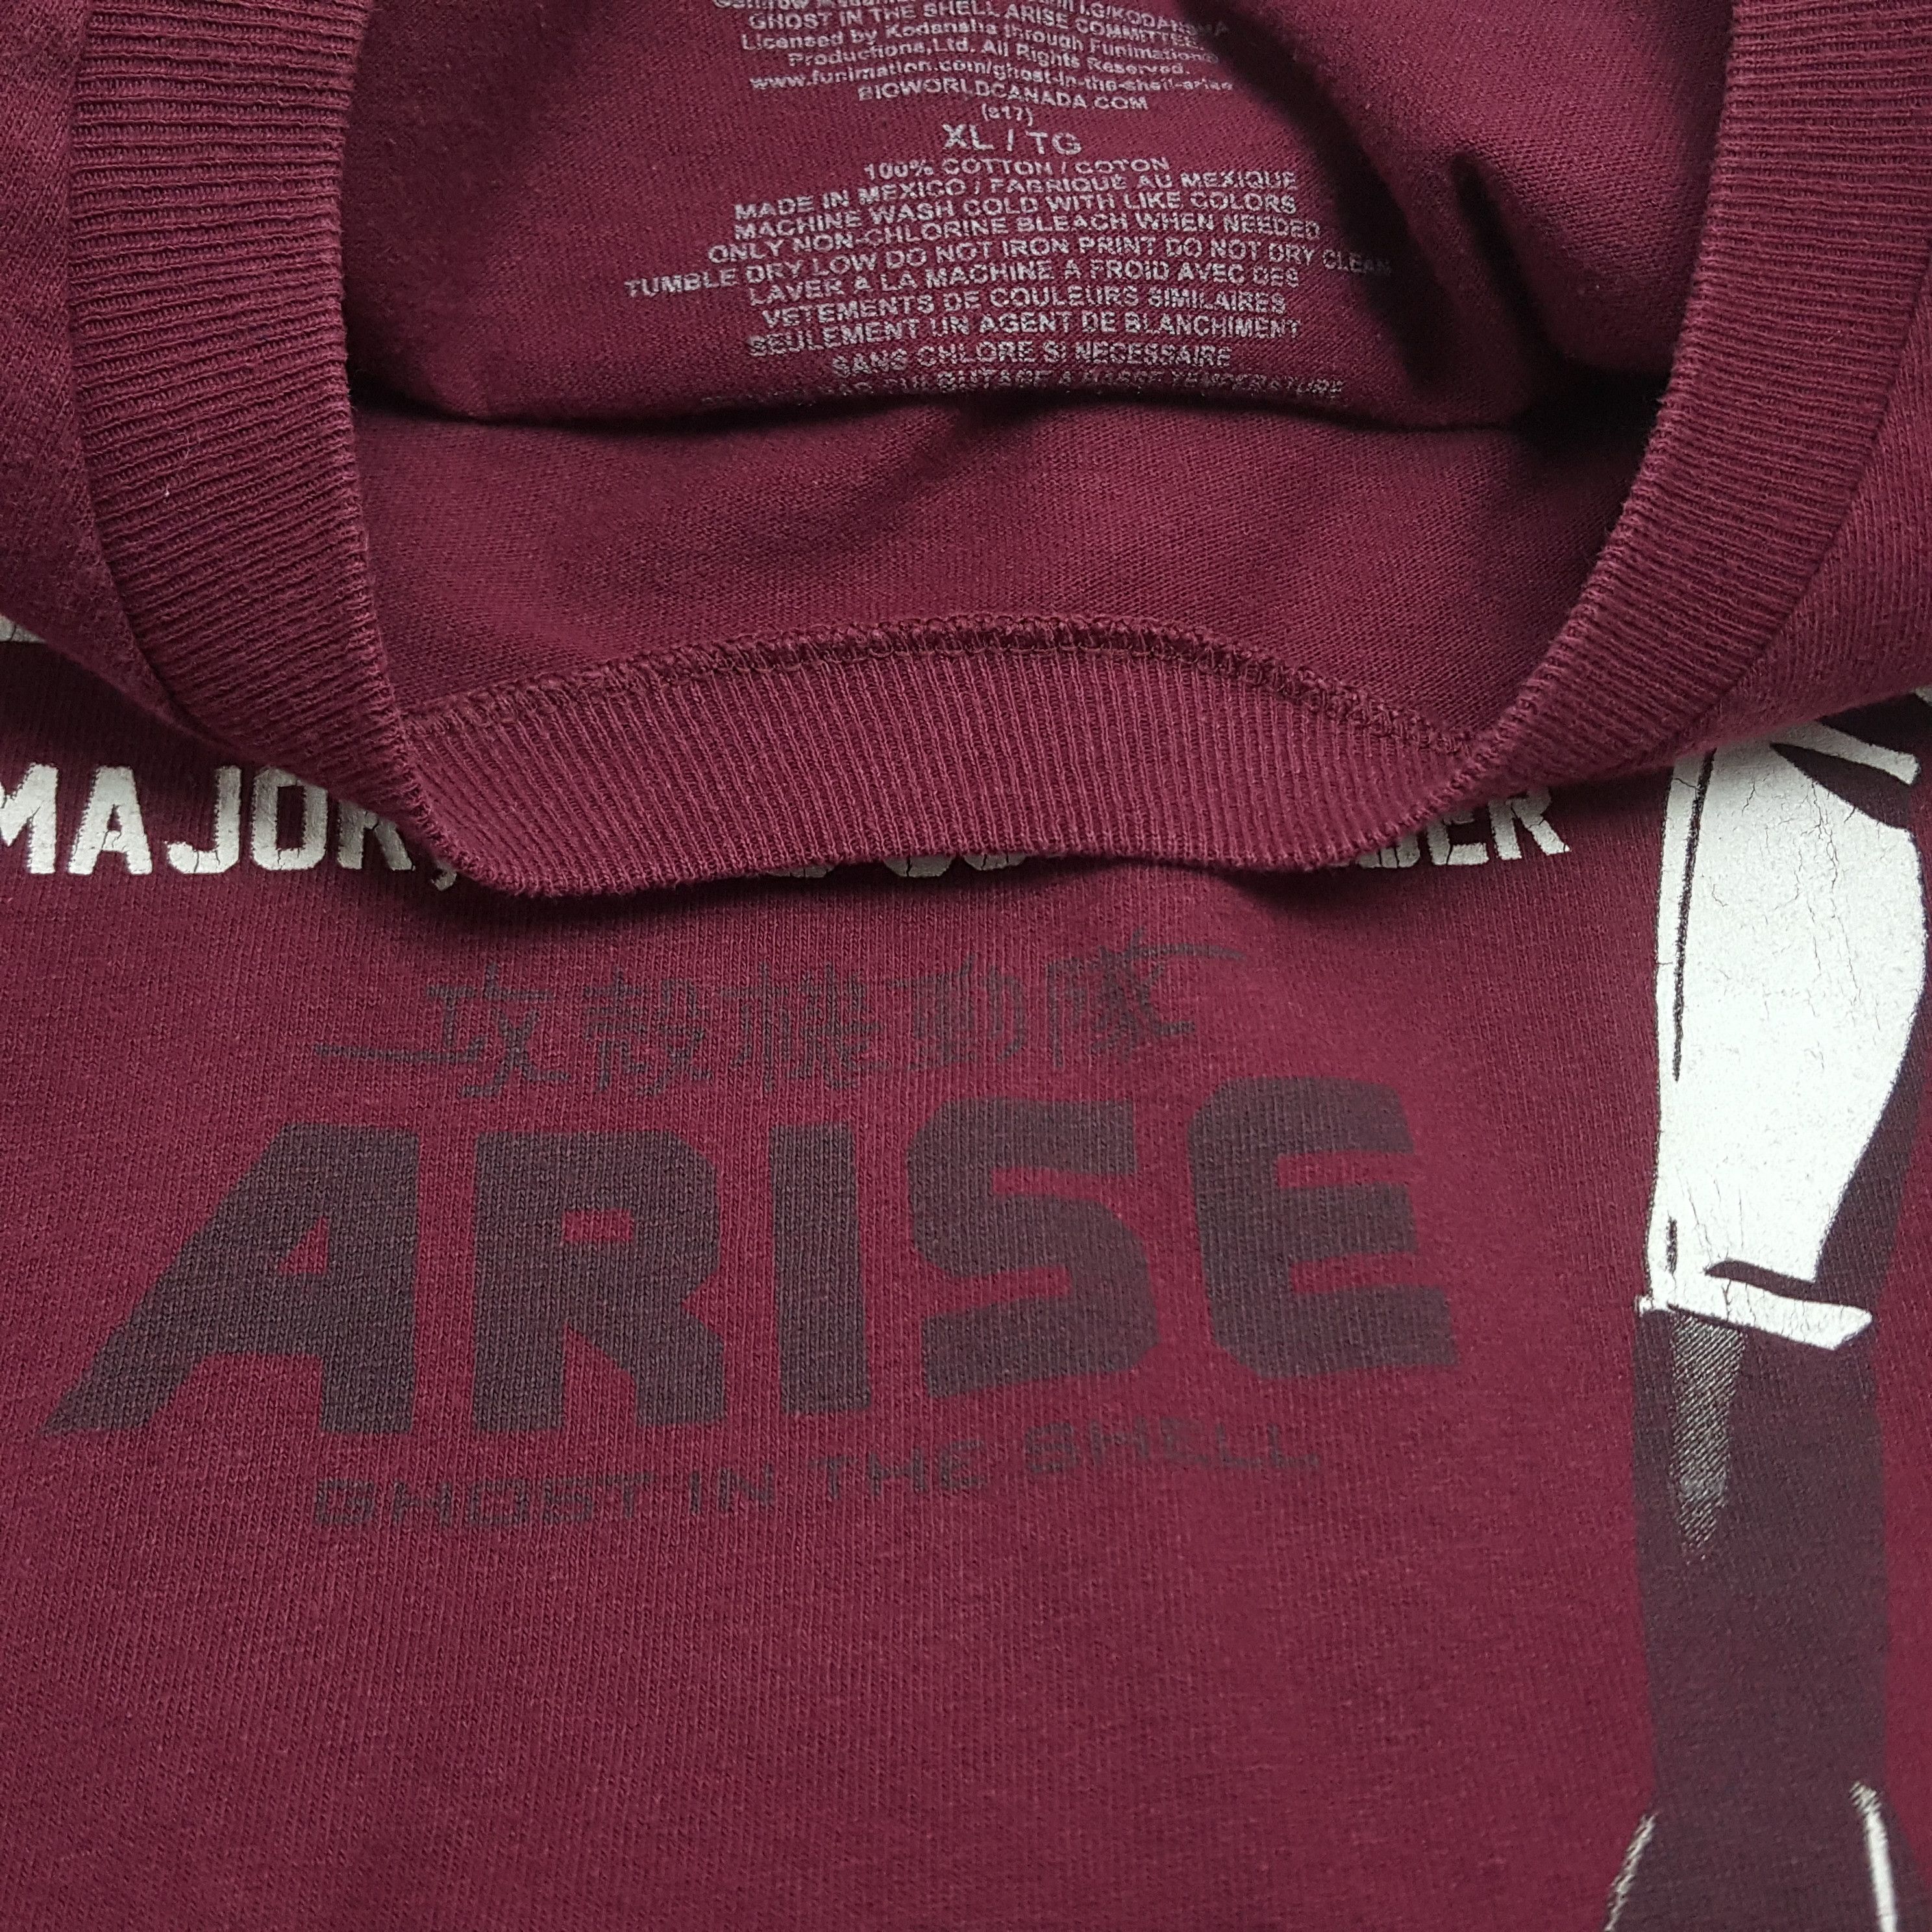 Vintage Vintage ARISE GHOST IN THE SHELL Japanese Anime Series cp2 Size US XL / EU 56 / 4 - 2 Preview